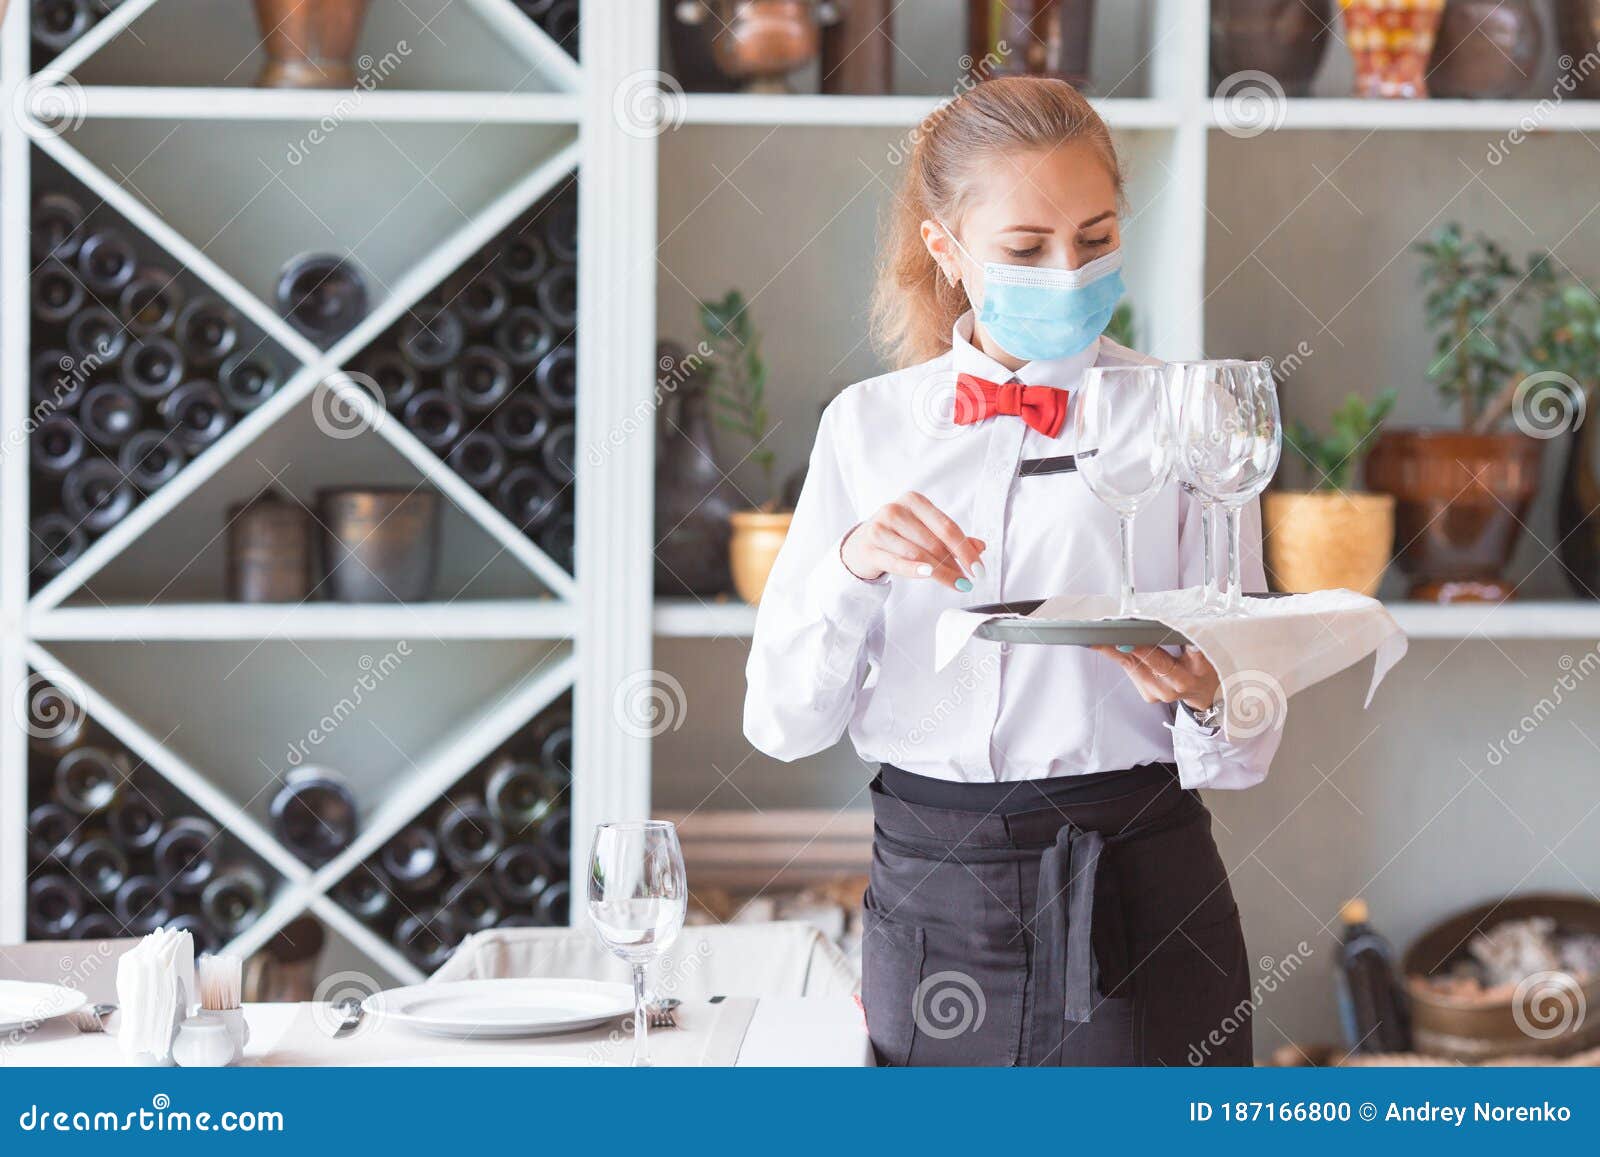 the waiter serves a table in a cafe in a protective mask